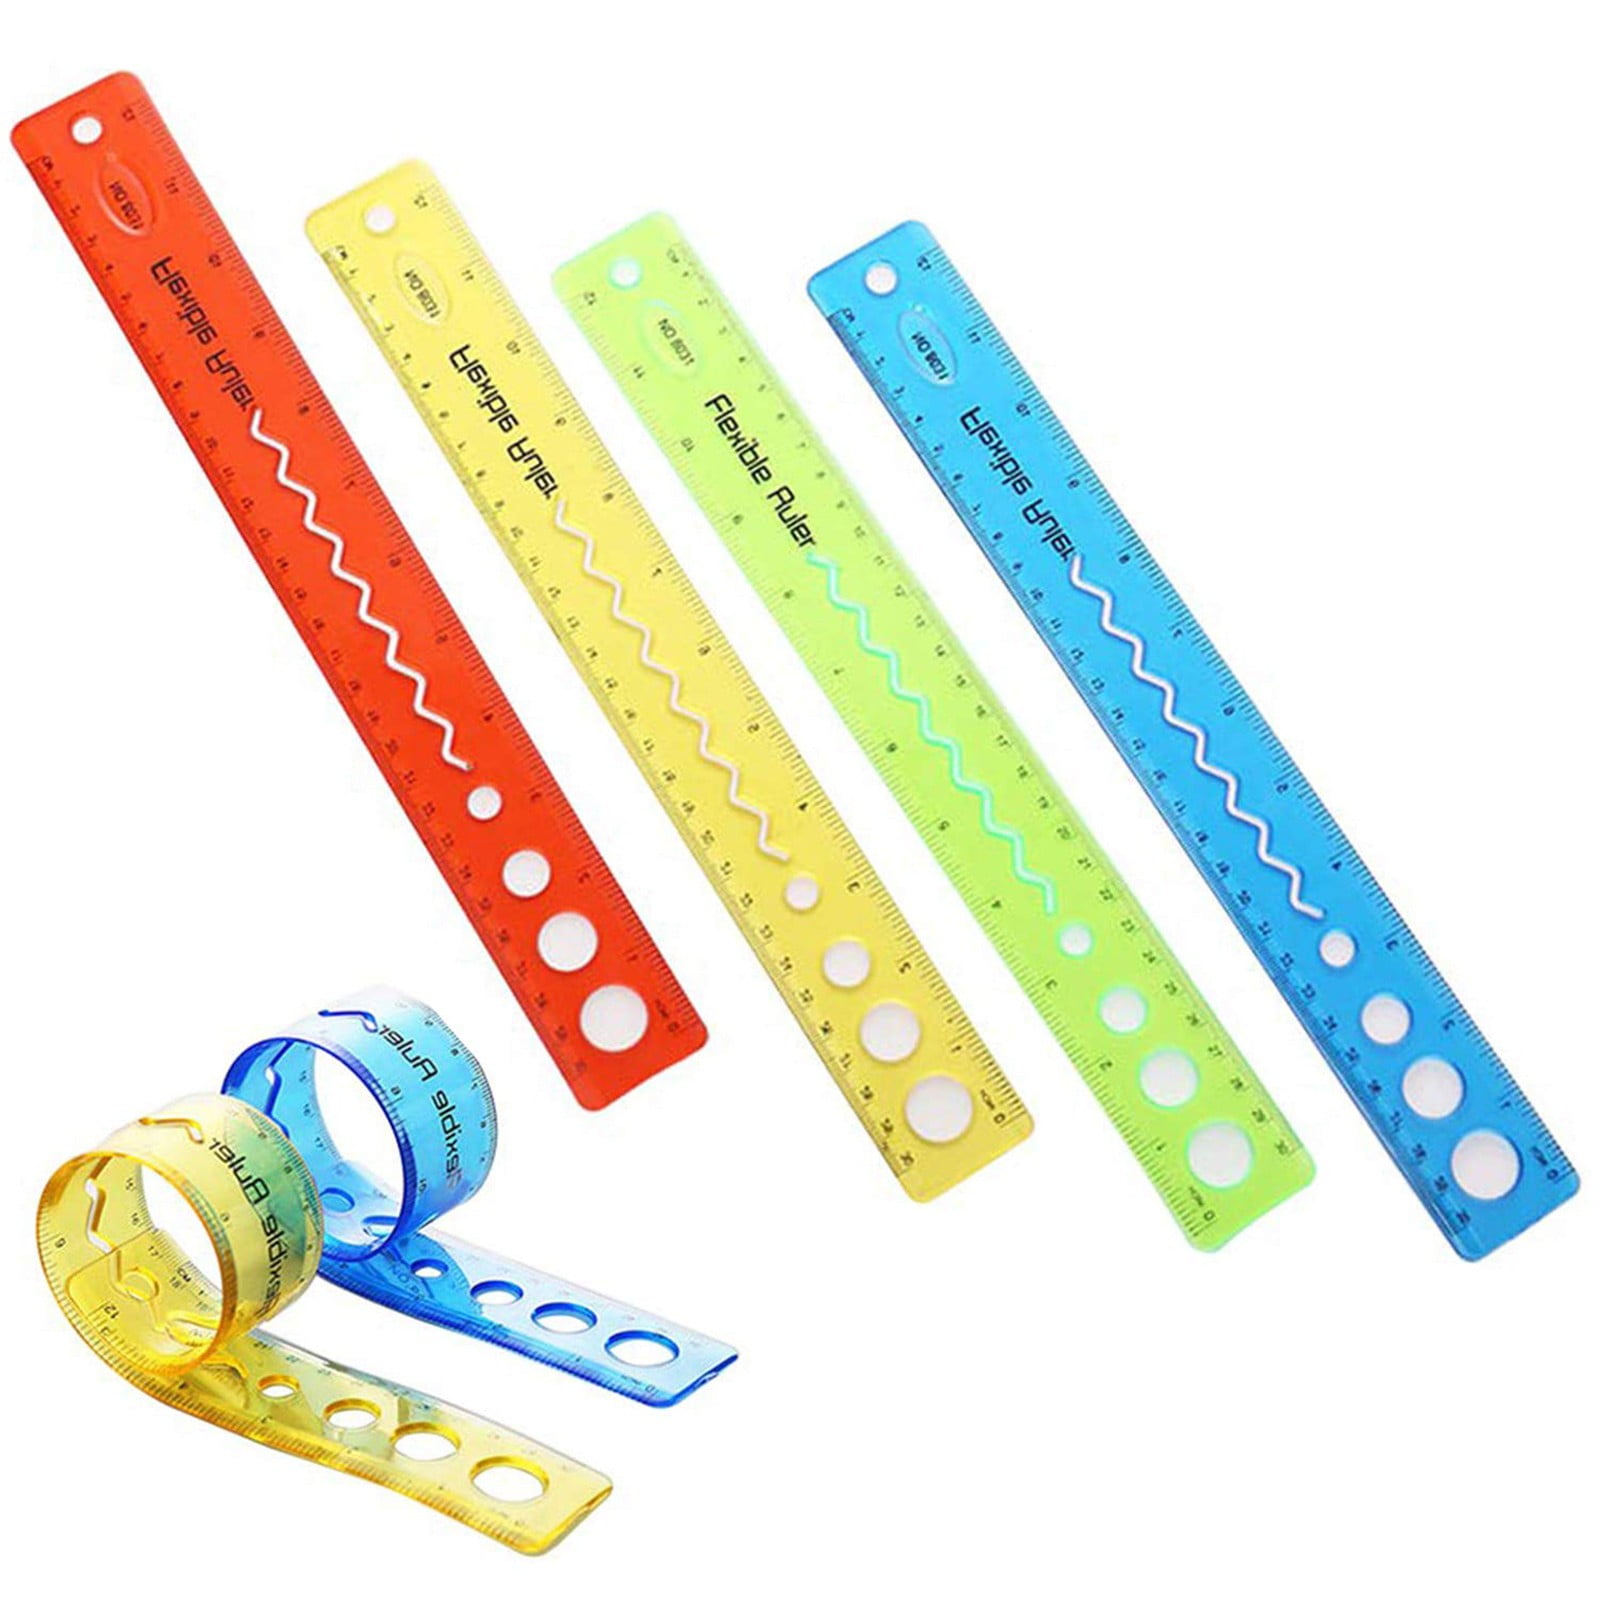 4 PCS Flexible Ruler, Bendable Ruler Soft Ruler for Kids, Colorful Bendy  Plastic Ruler 6.9 and 12.7 Inches Soft Ruler for Drawing Measuring Tools  for